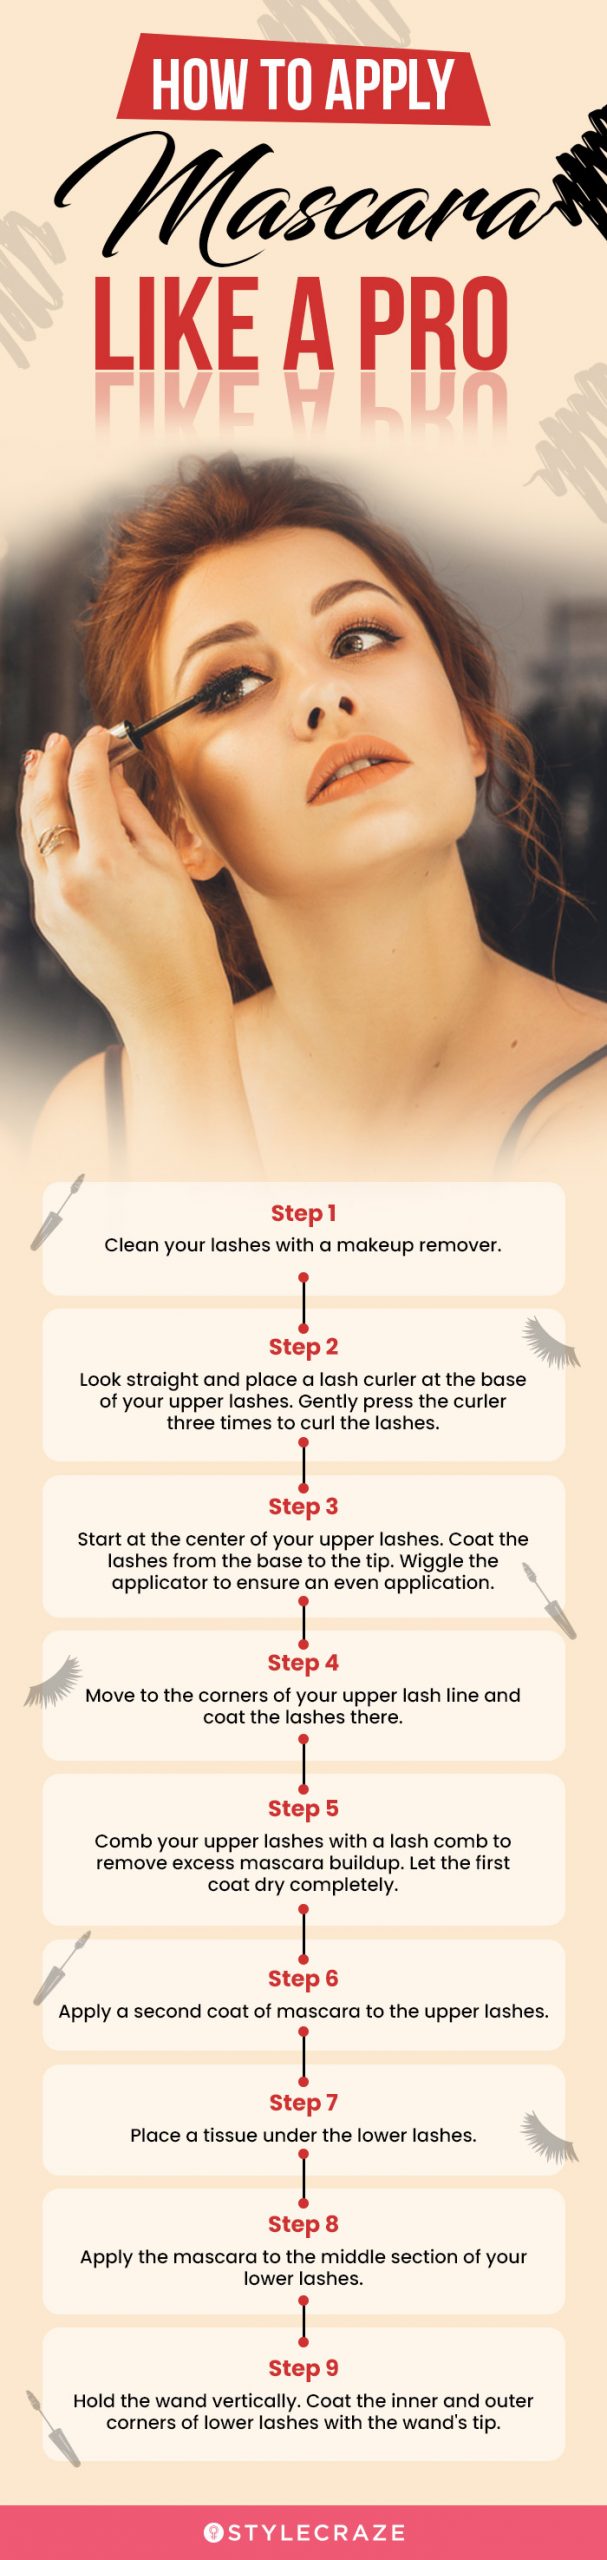 How To Apply Mascara Like A Pro (infographic)